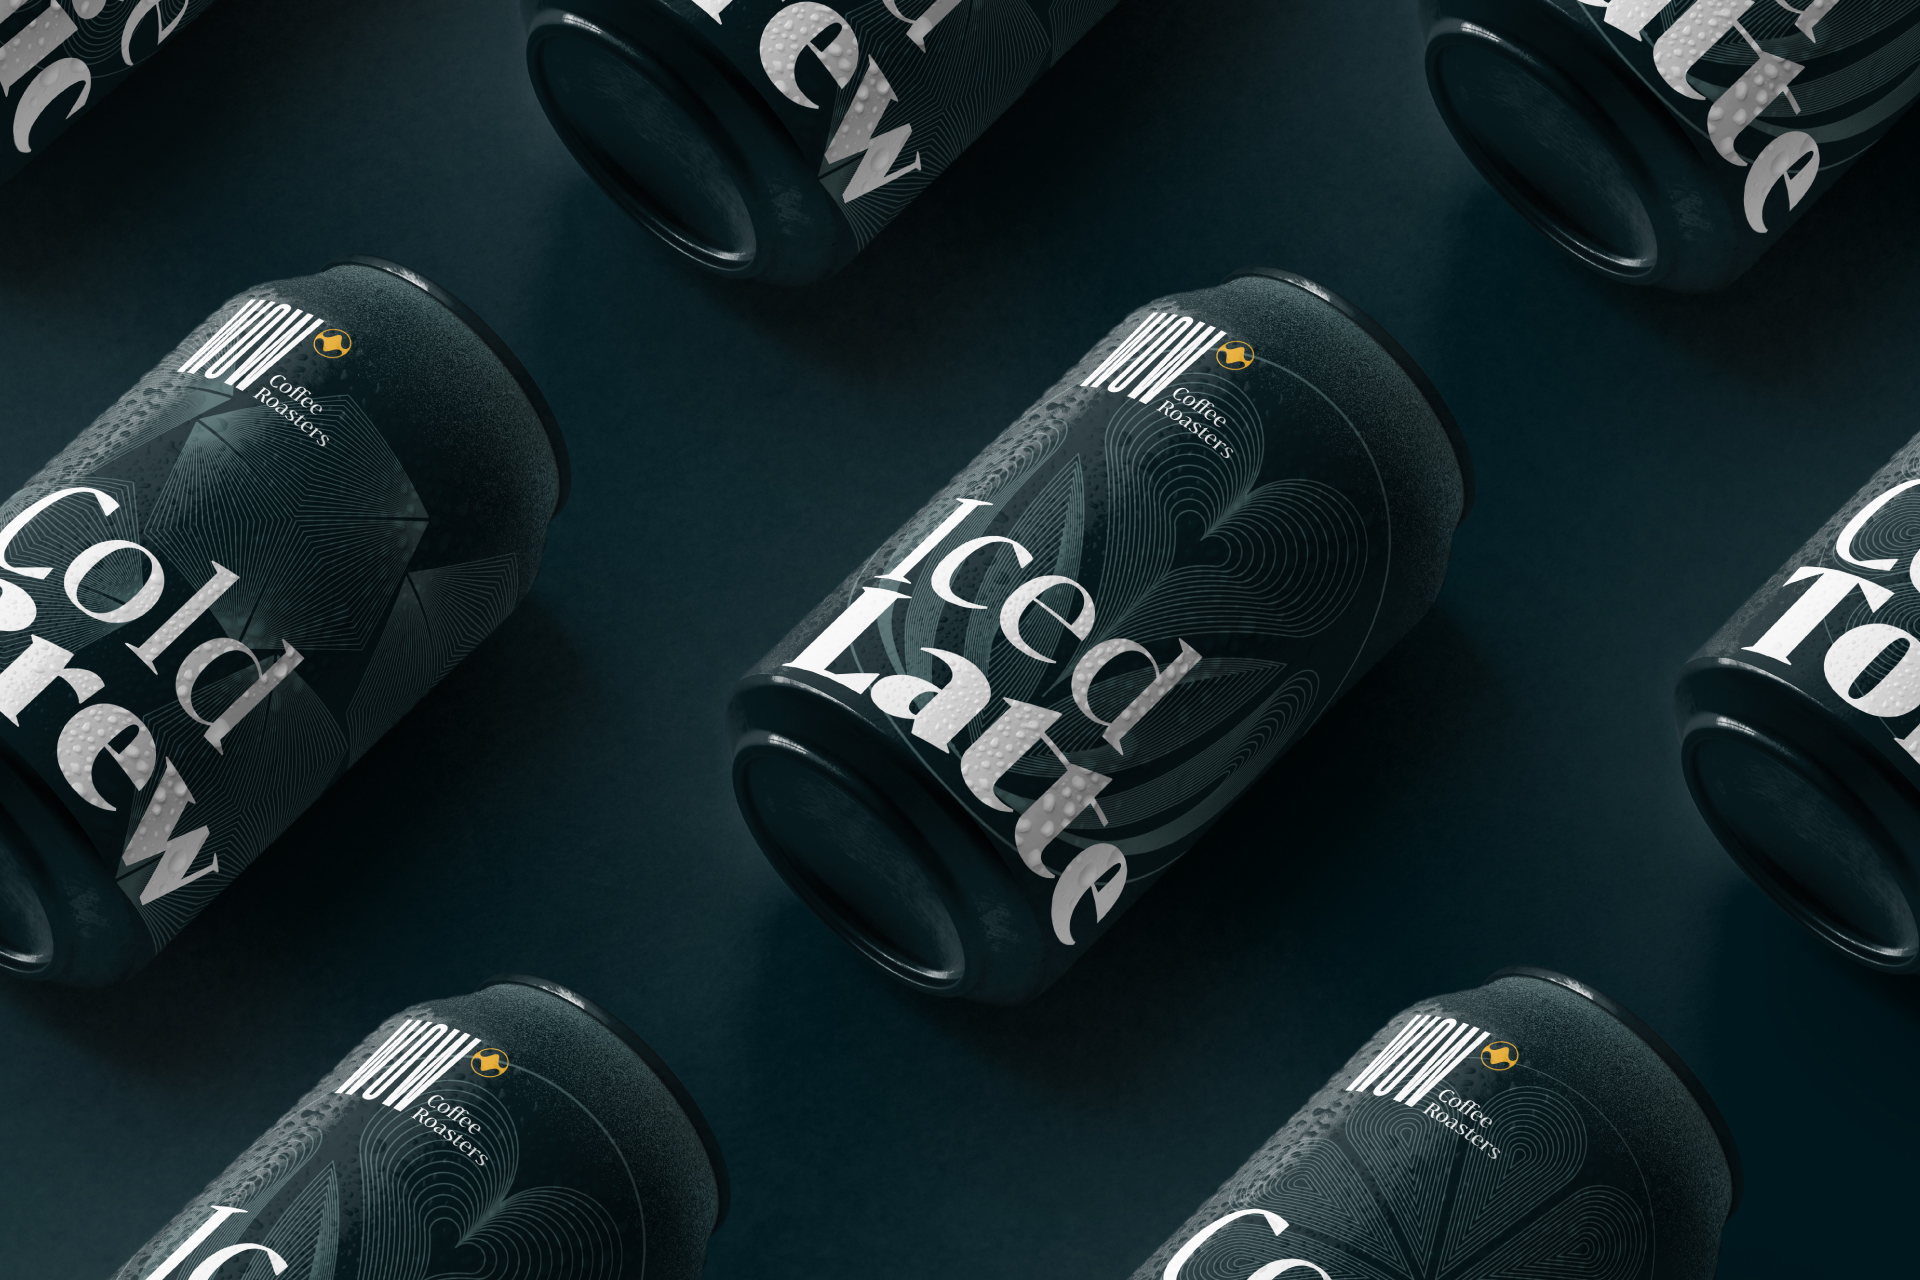 Wow Coffee Branding And Packaging Design